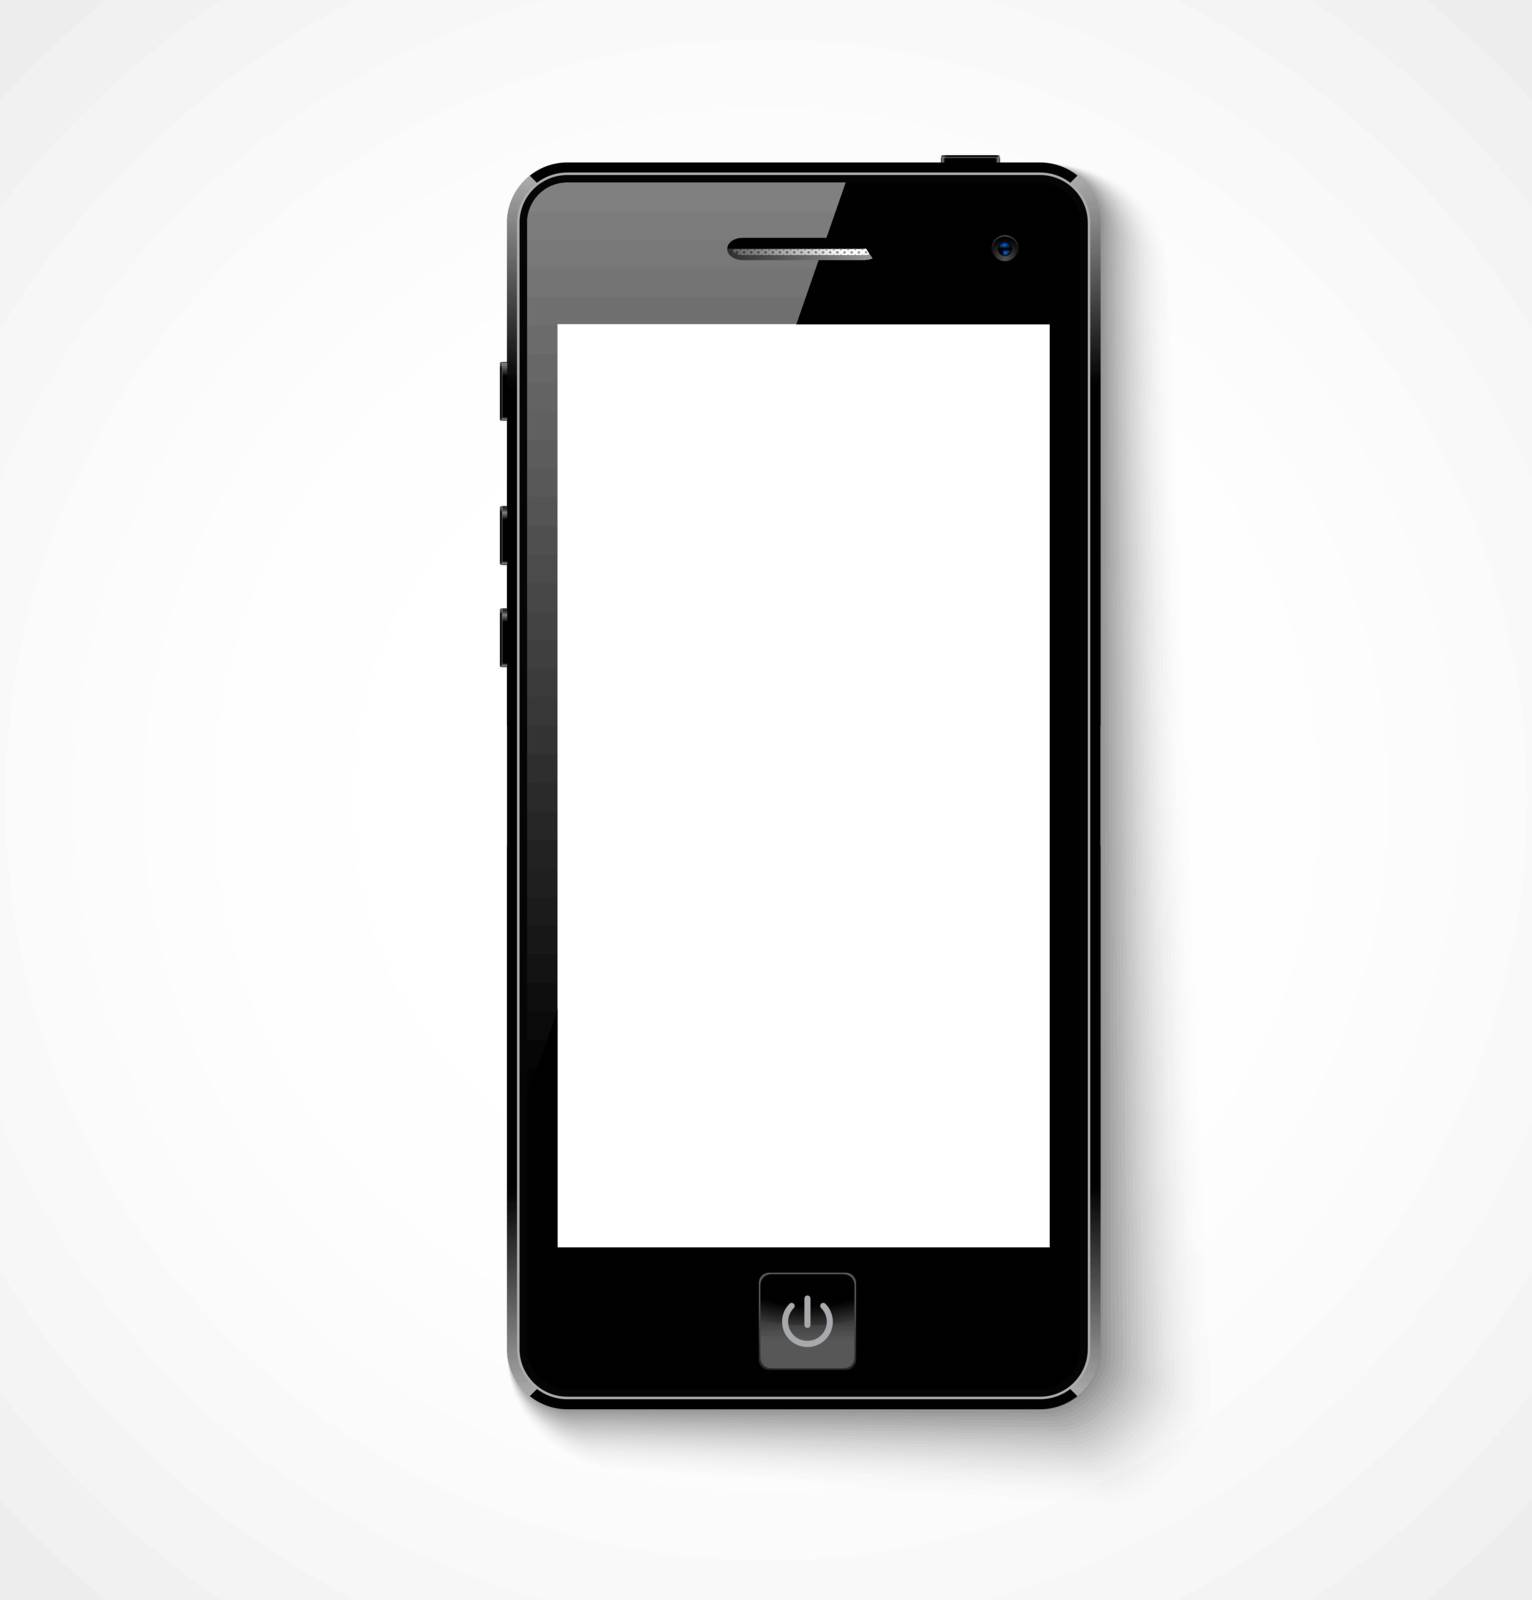 Mobile phone with white screen by sky_max